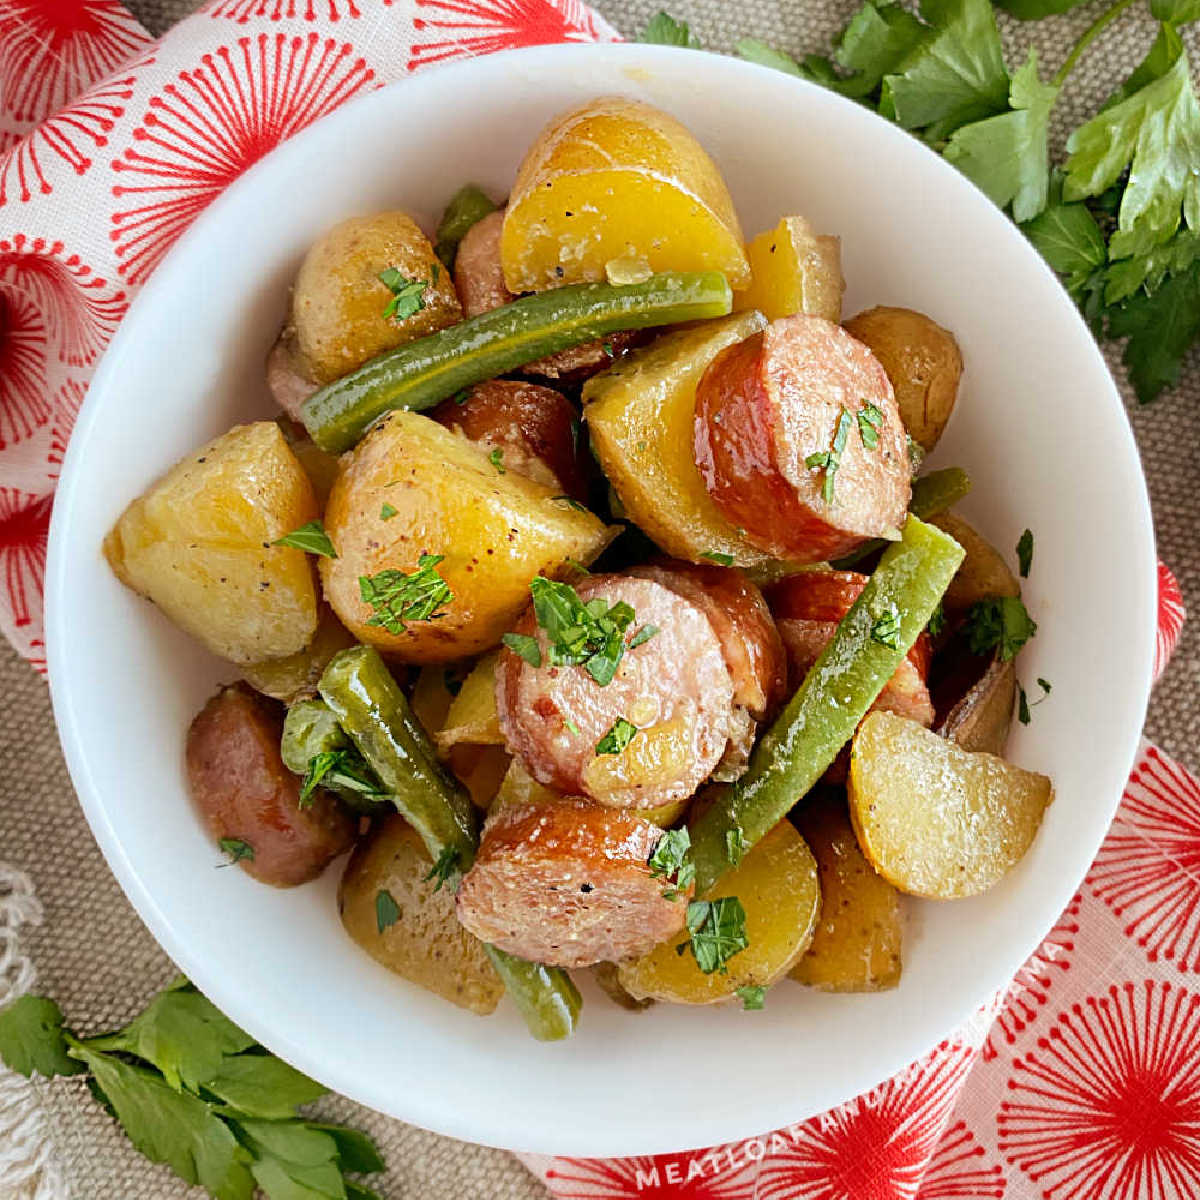 Crock Pot Sausage and Potatoes (& VIDEO!) - Easy Slow Cooker Recipe